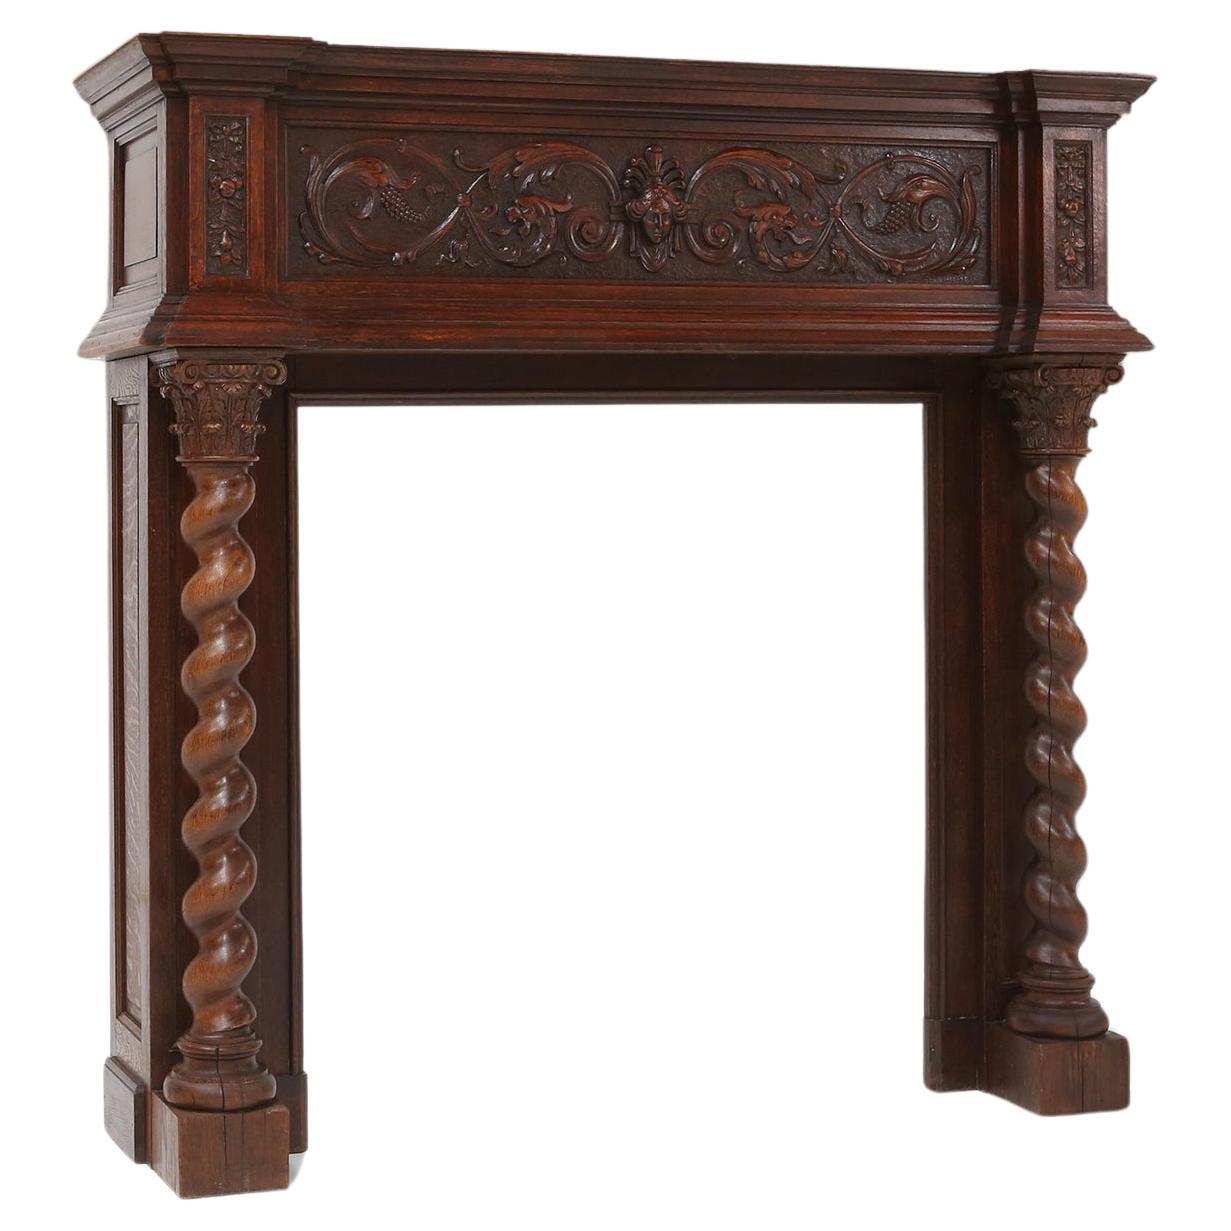 Belgium / 1920 / fireplace / oak / romantic / antique

A beautifully hand carved fireplace in solid oak made in Belgium around 1920. This spectacularly detailed antique fire surround has a rich aged character. The front frieze was carved with